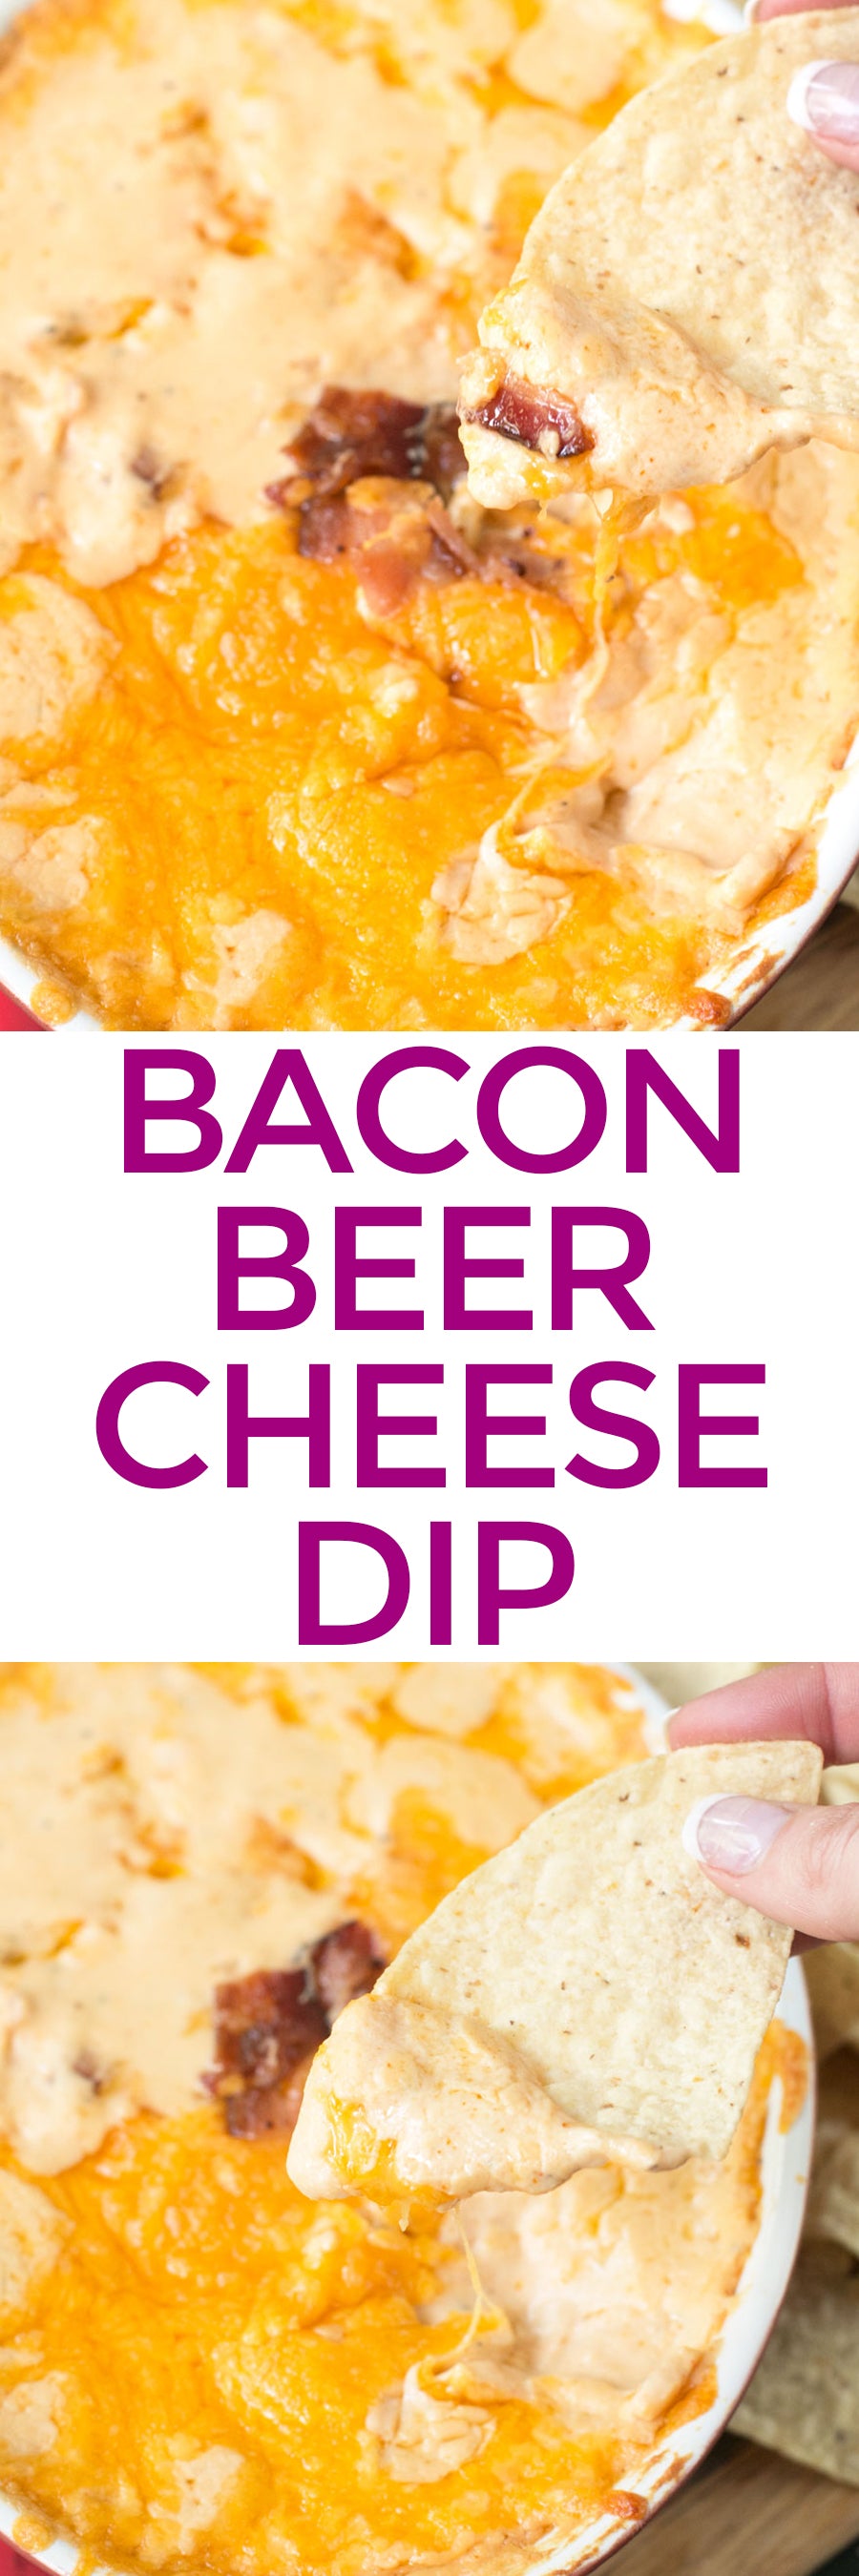 Bacon Beer Cheese Dip | pigofthemonth.com #tailgating #bacon #beer